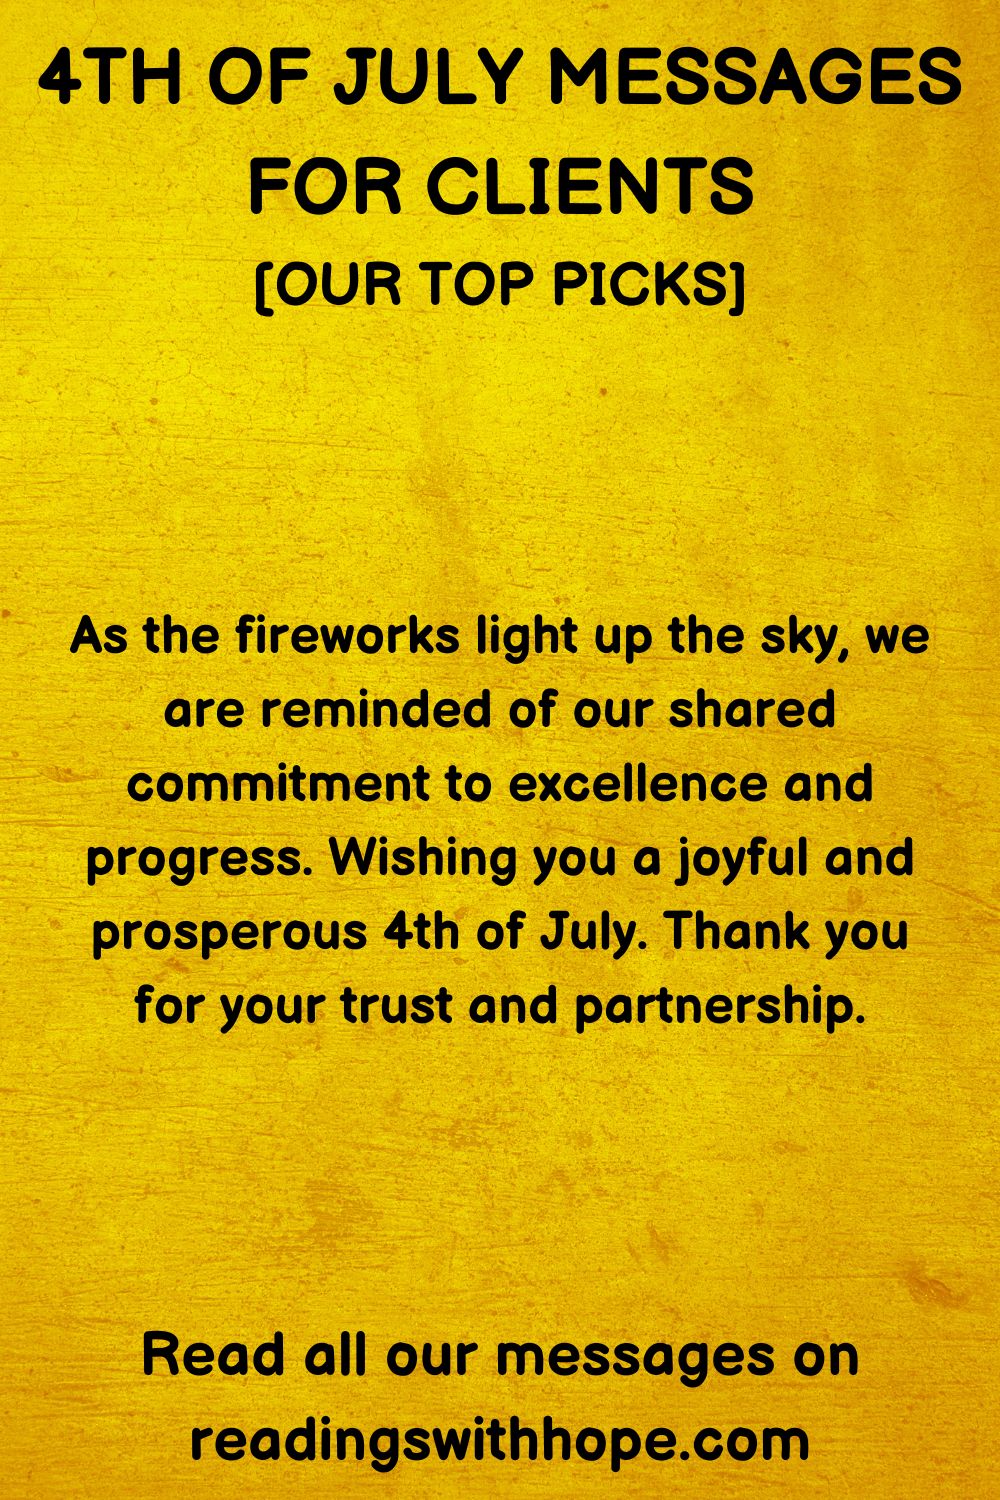 4th of July Message For Clients
